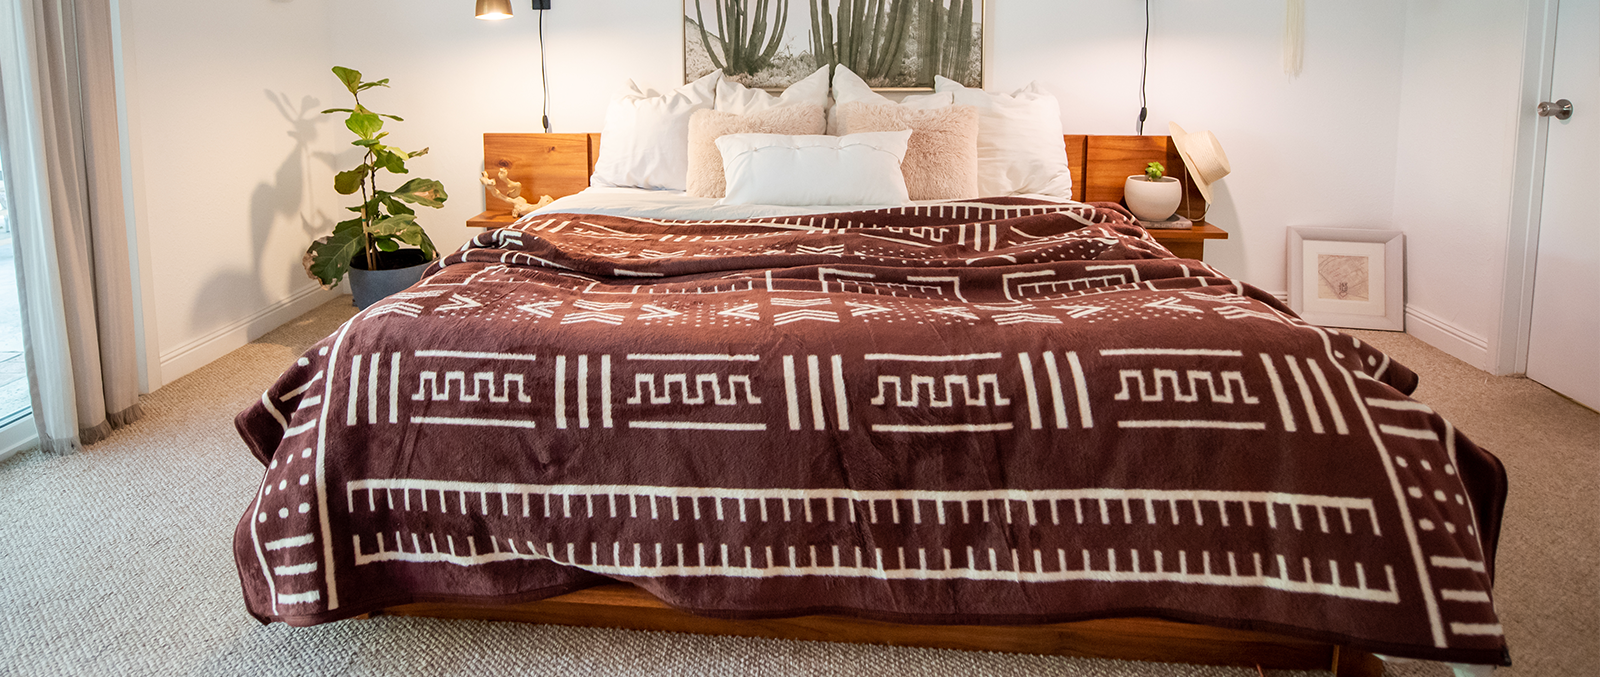 How to Style a King-Size Bed for Chic, Ultra-Cozy Results